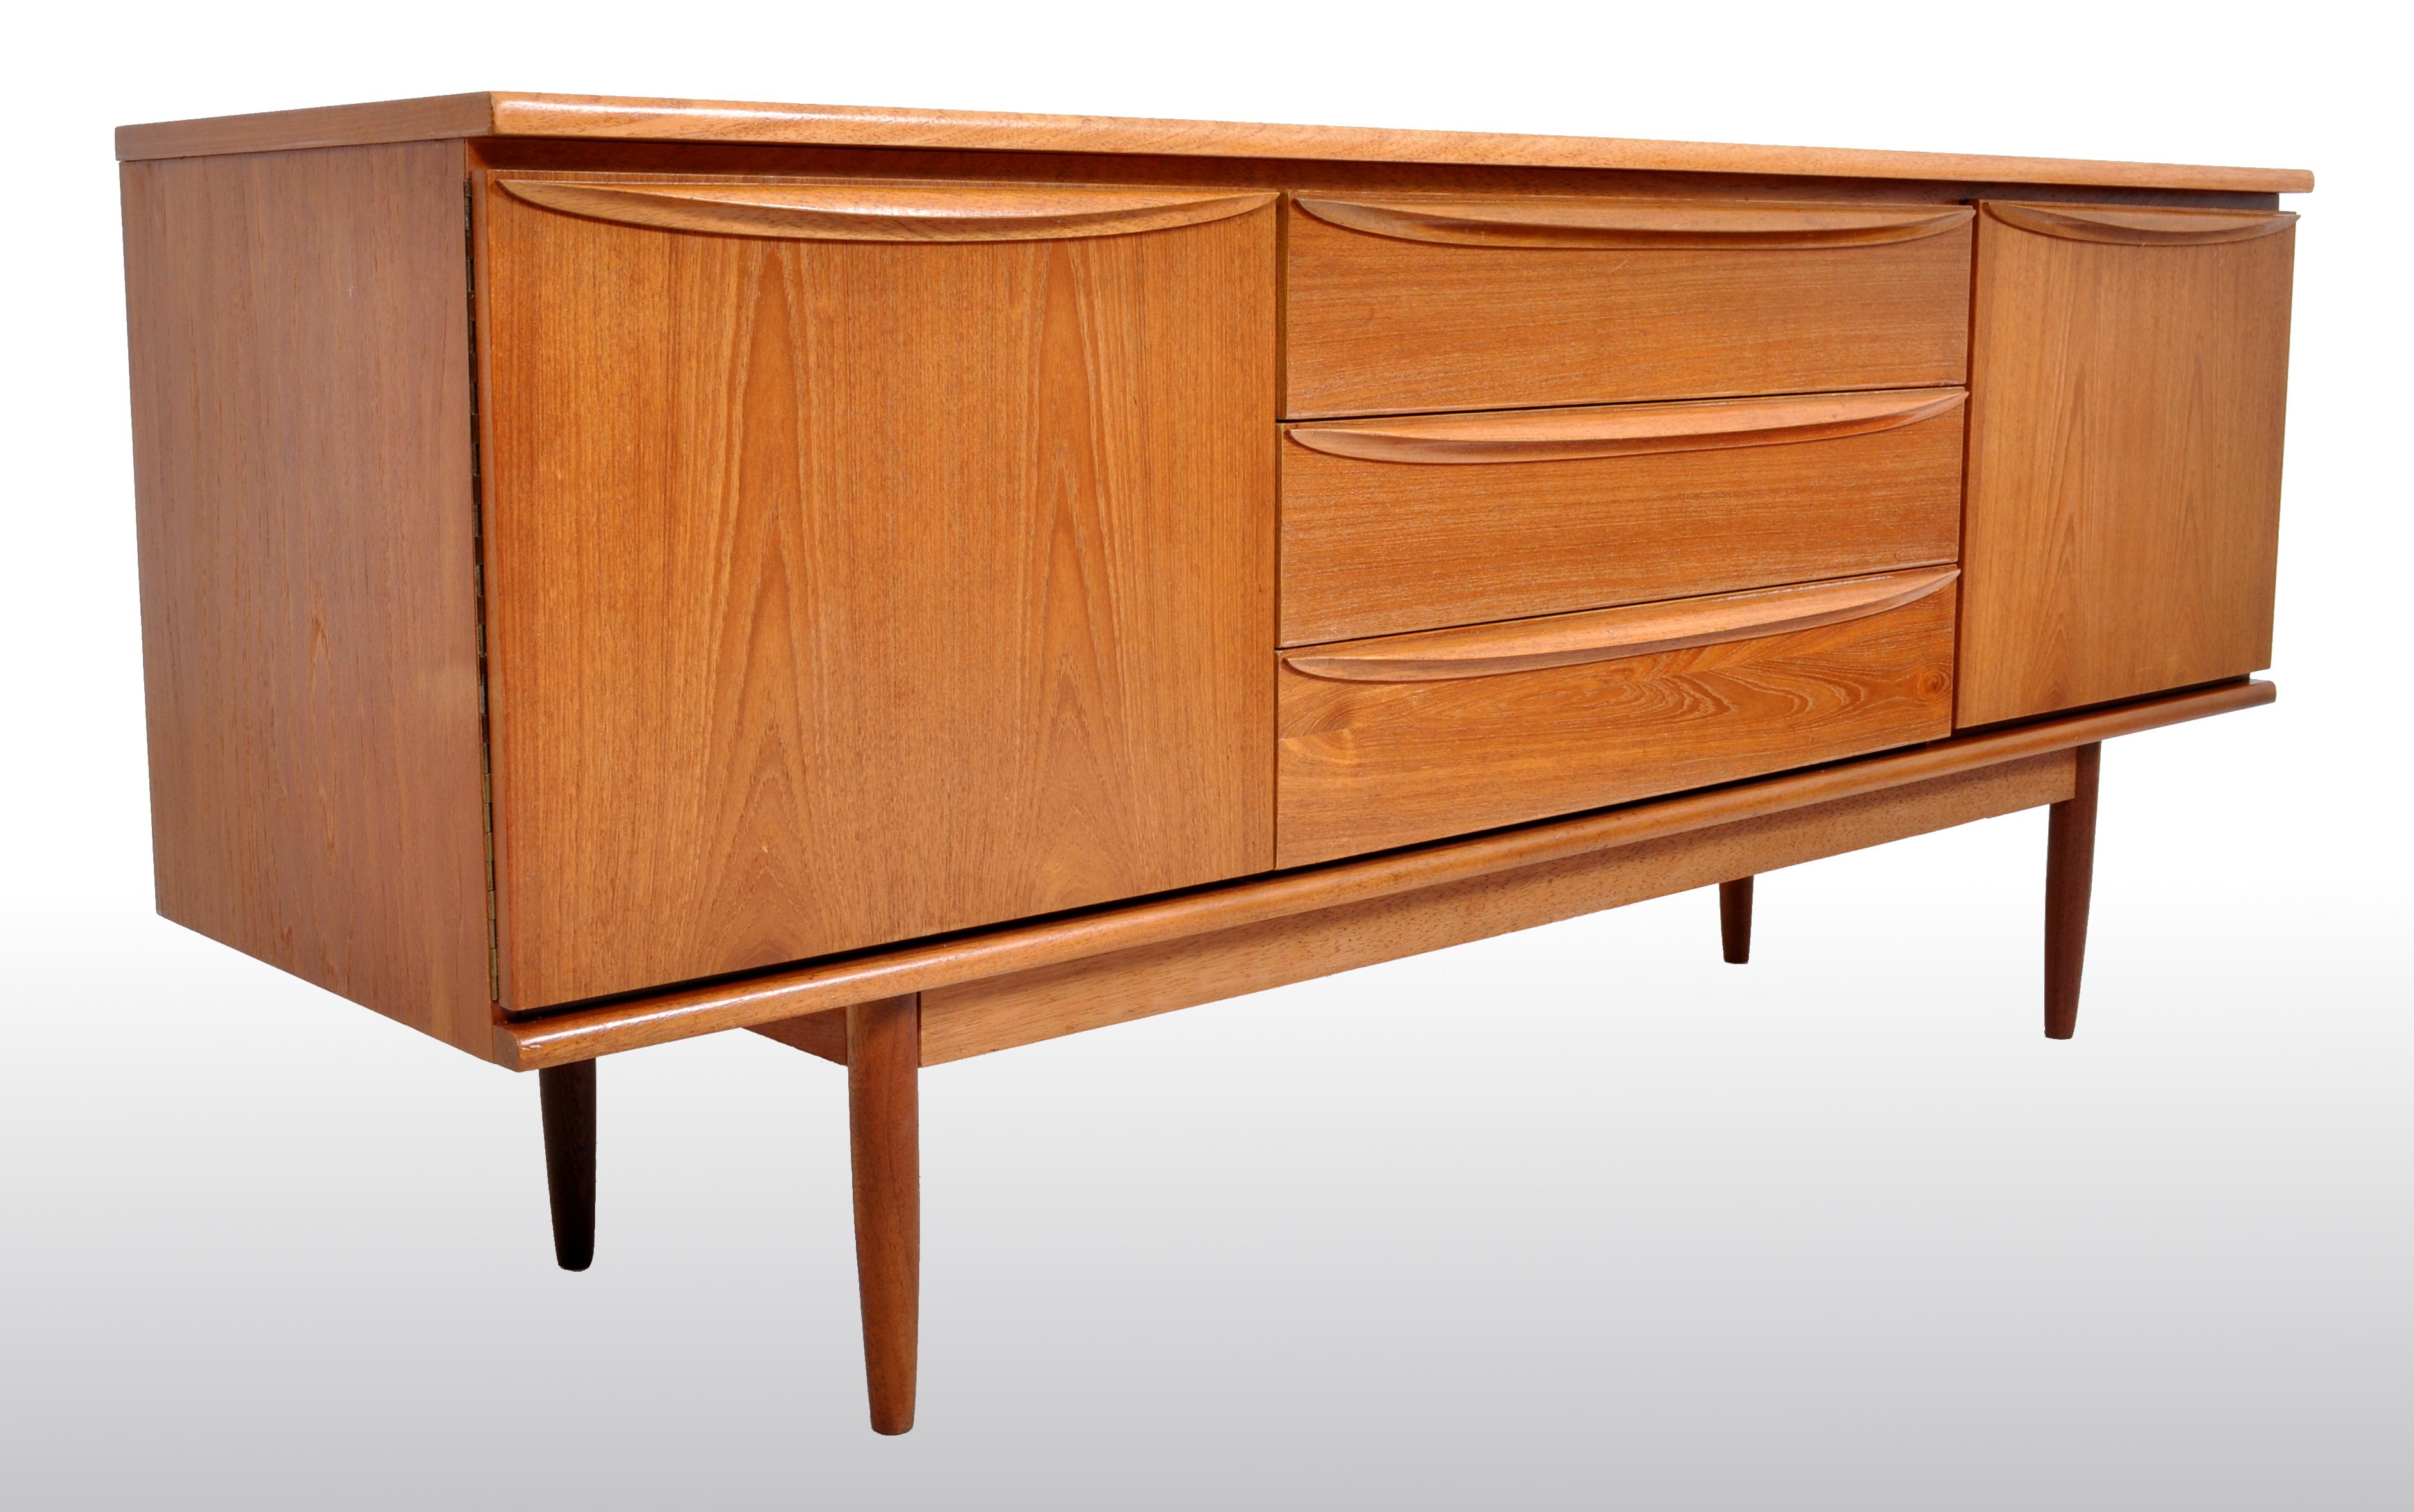 Mid-Century Modern Danish credenza in teak, 1960s. This very sleek credenza having a central bank of three drawers flanked to either side by cupboard doors enclosing single shelves. The credenza raised on gently tapering round legs.